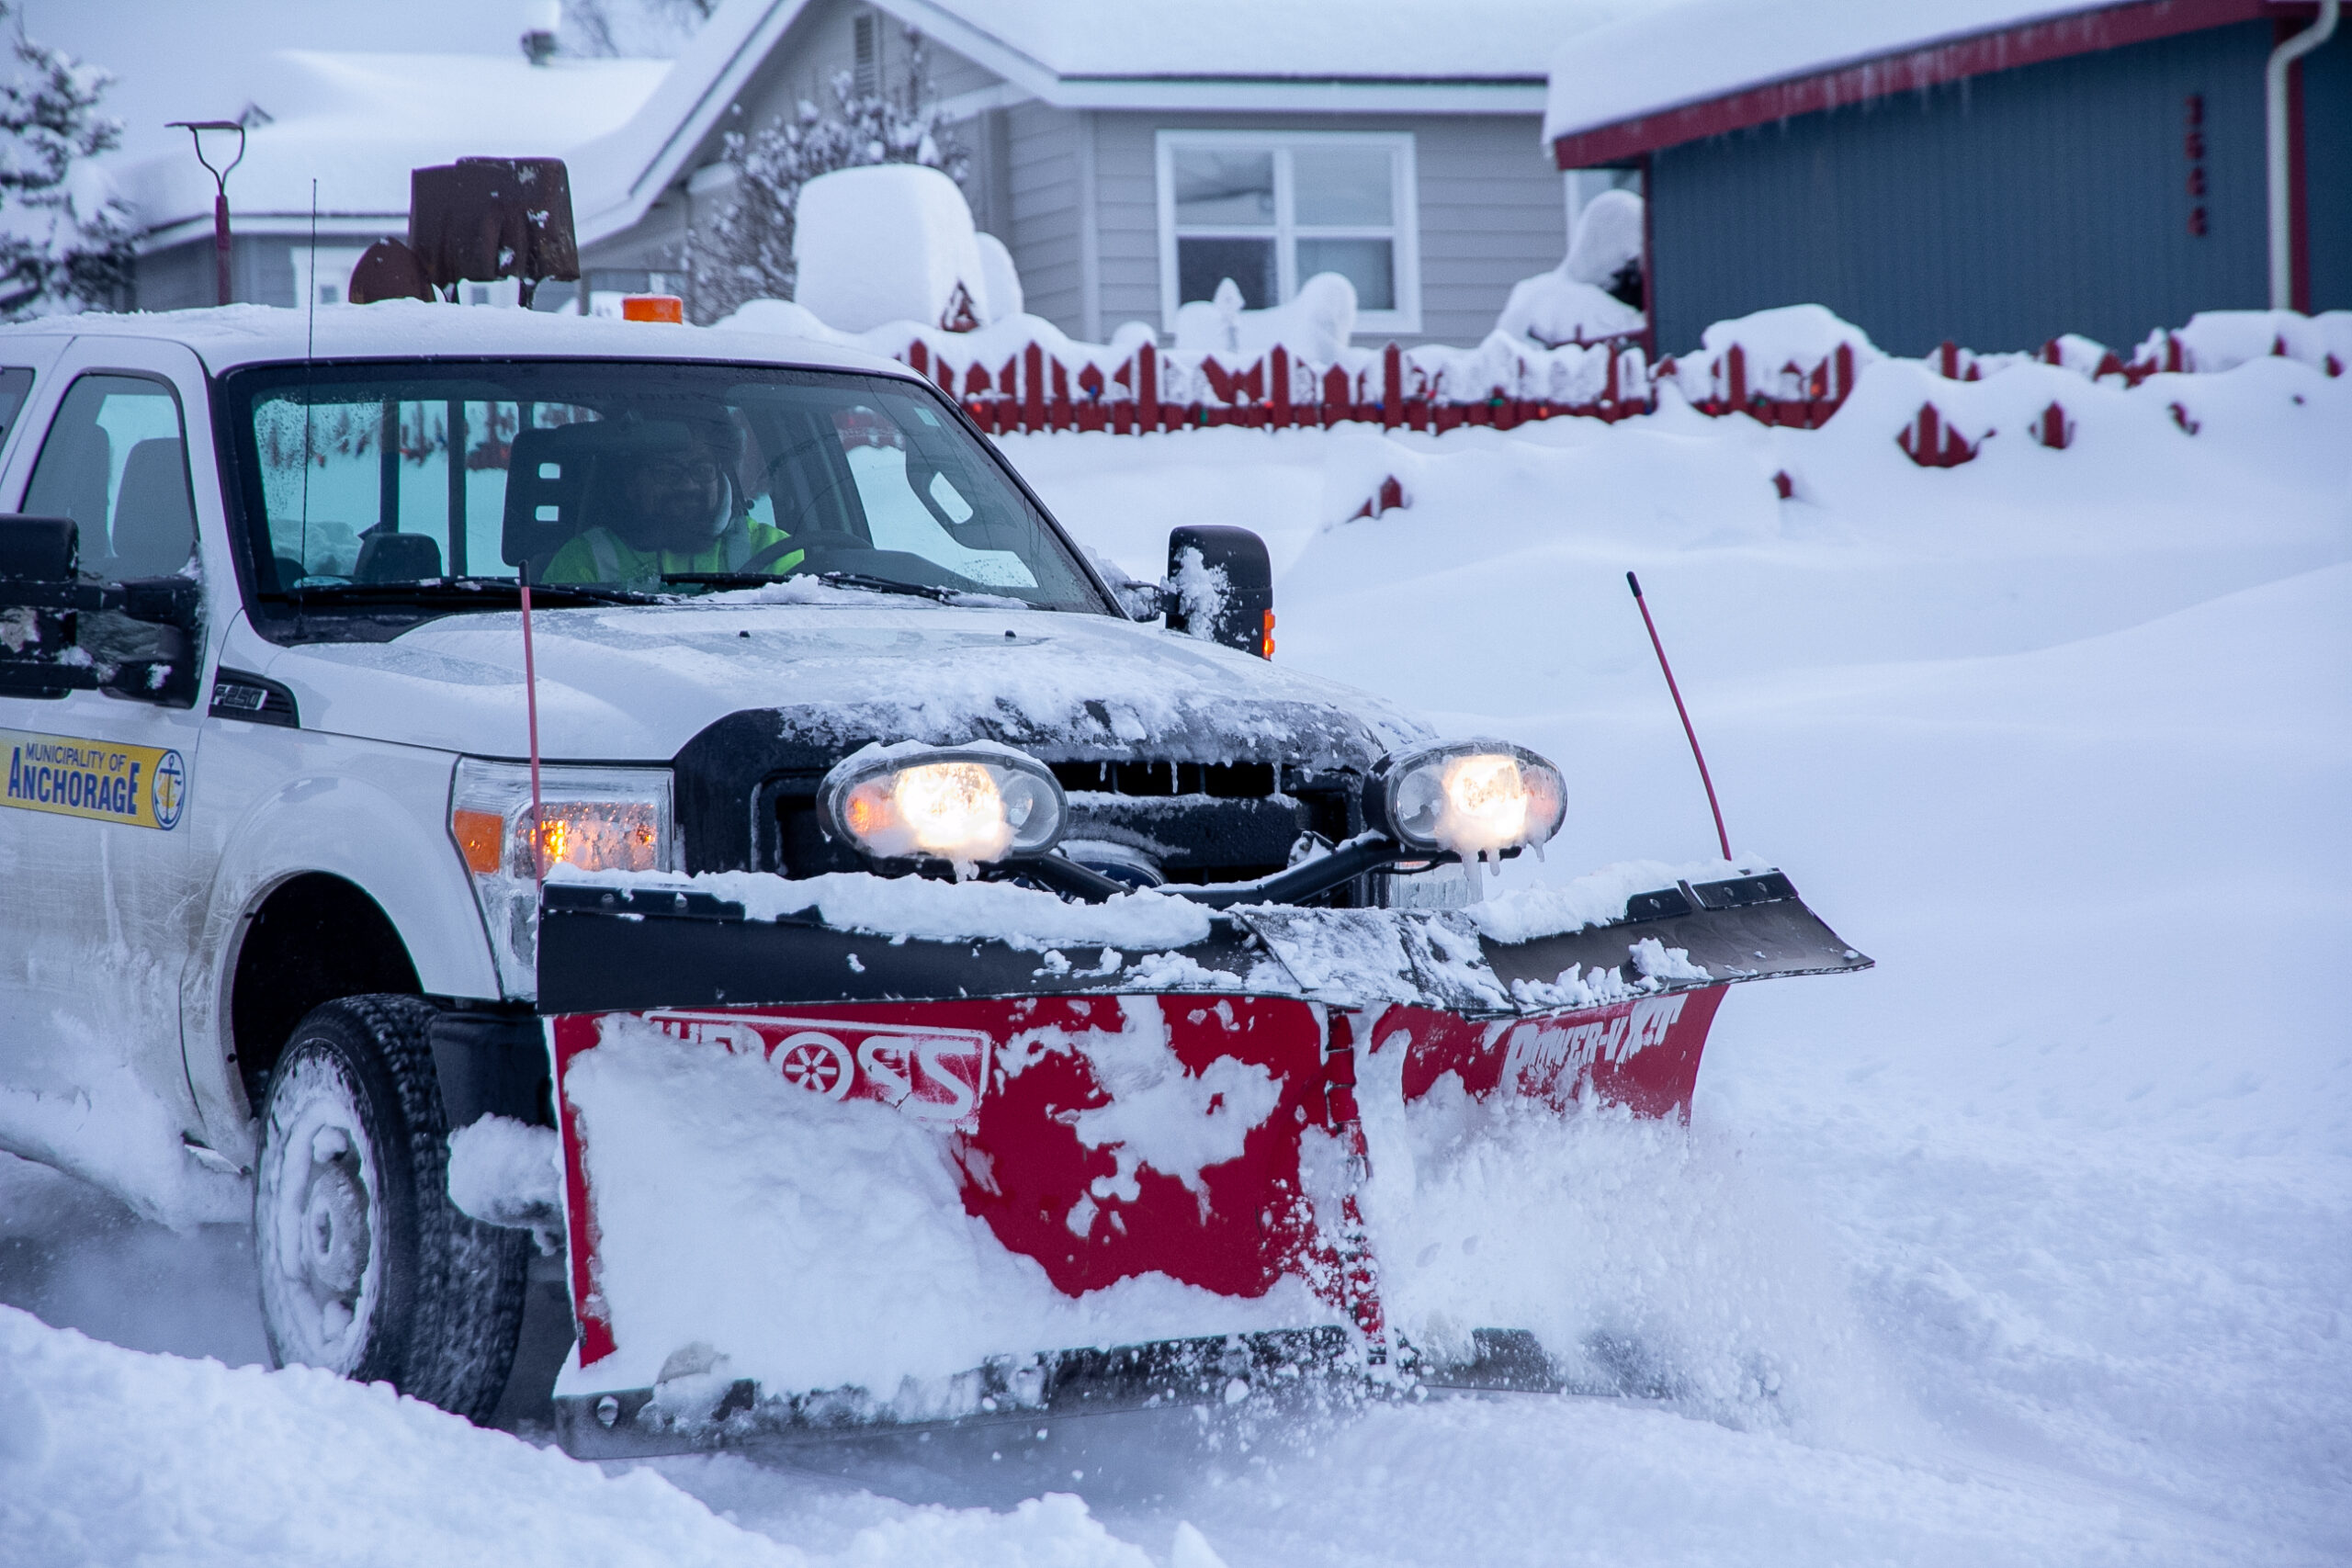 A snowplow pushes through thick snow on a residential street.